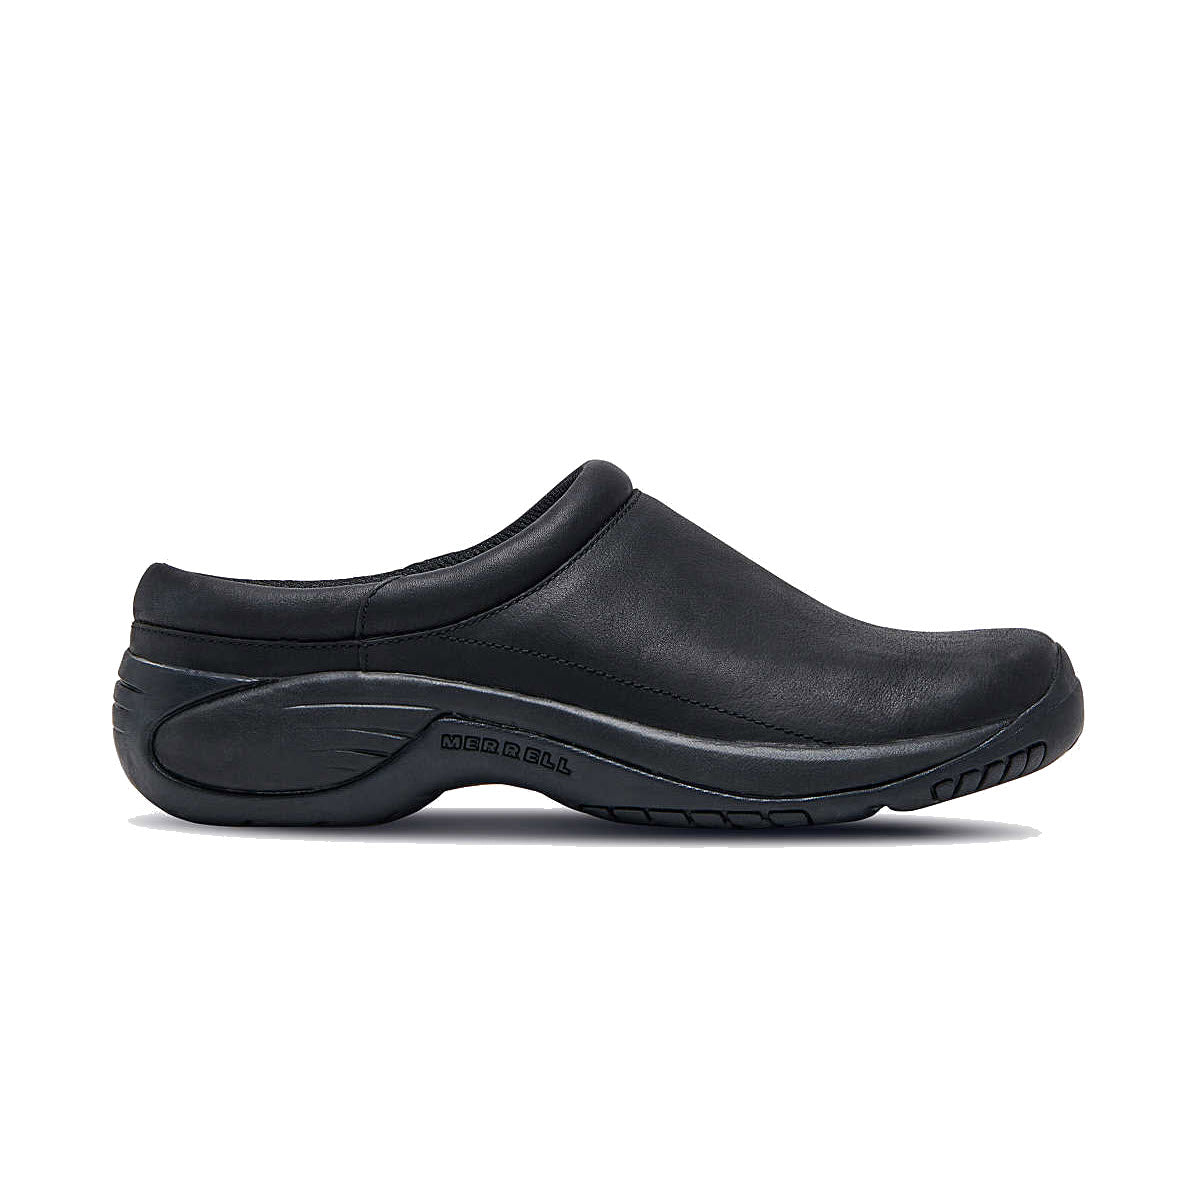 Merrell Encore Gust 2 black smooth slip-on shoe with a low profile sole, displayed on a white background.